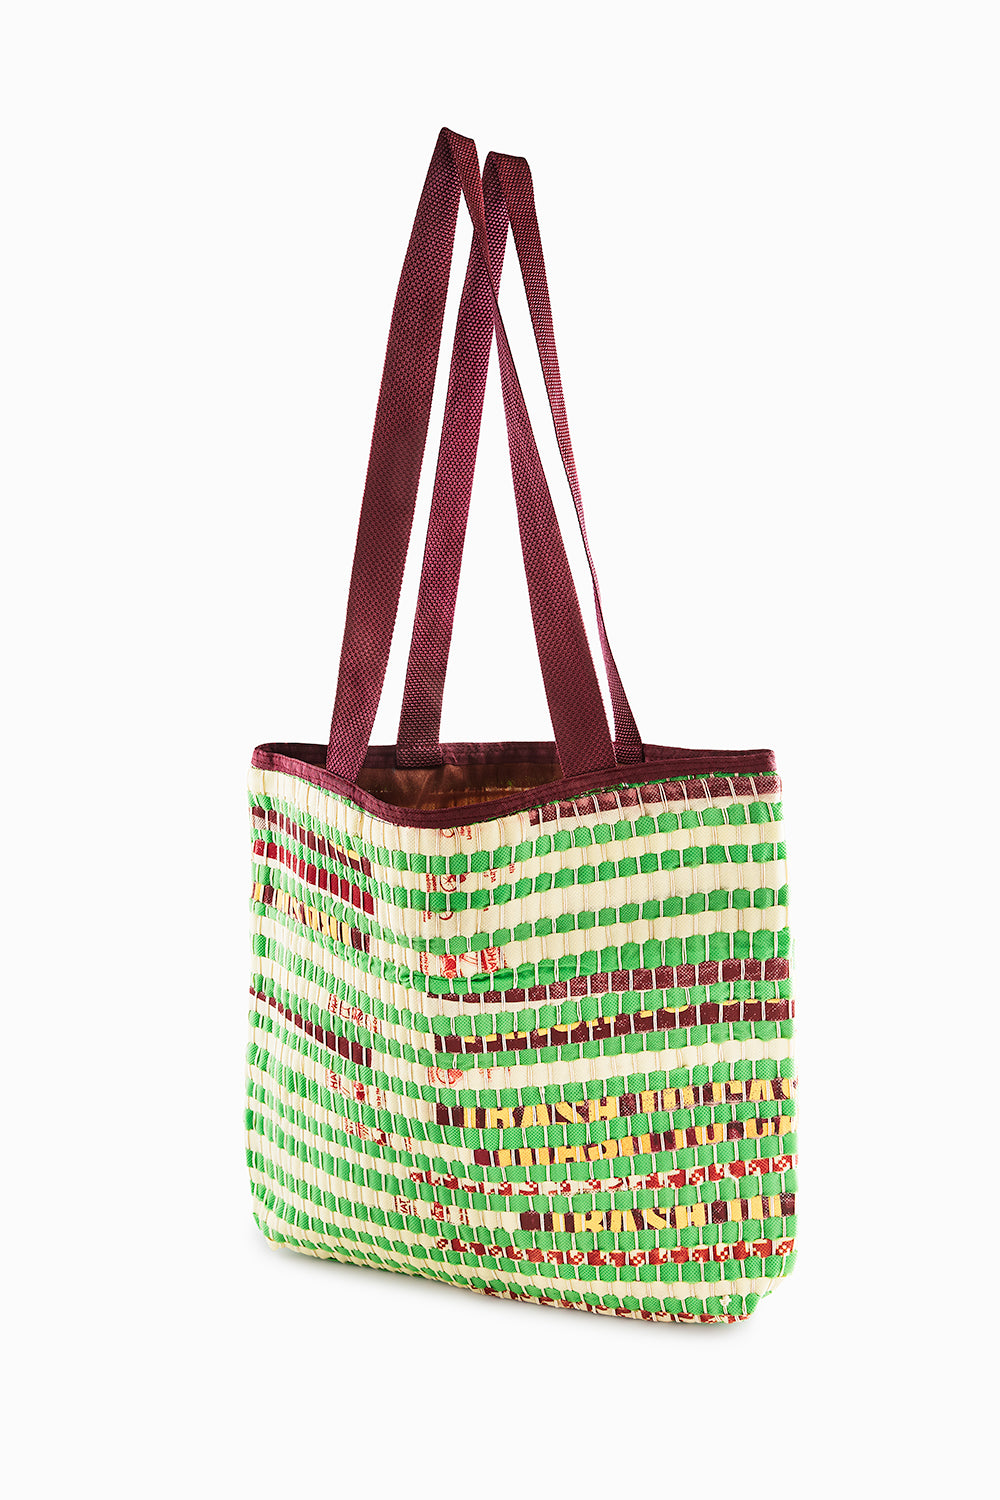 Lime Green Recycled Non-Woven Fabric Bag